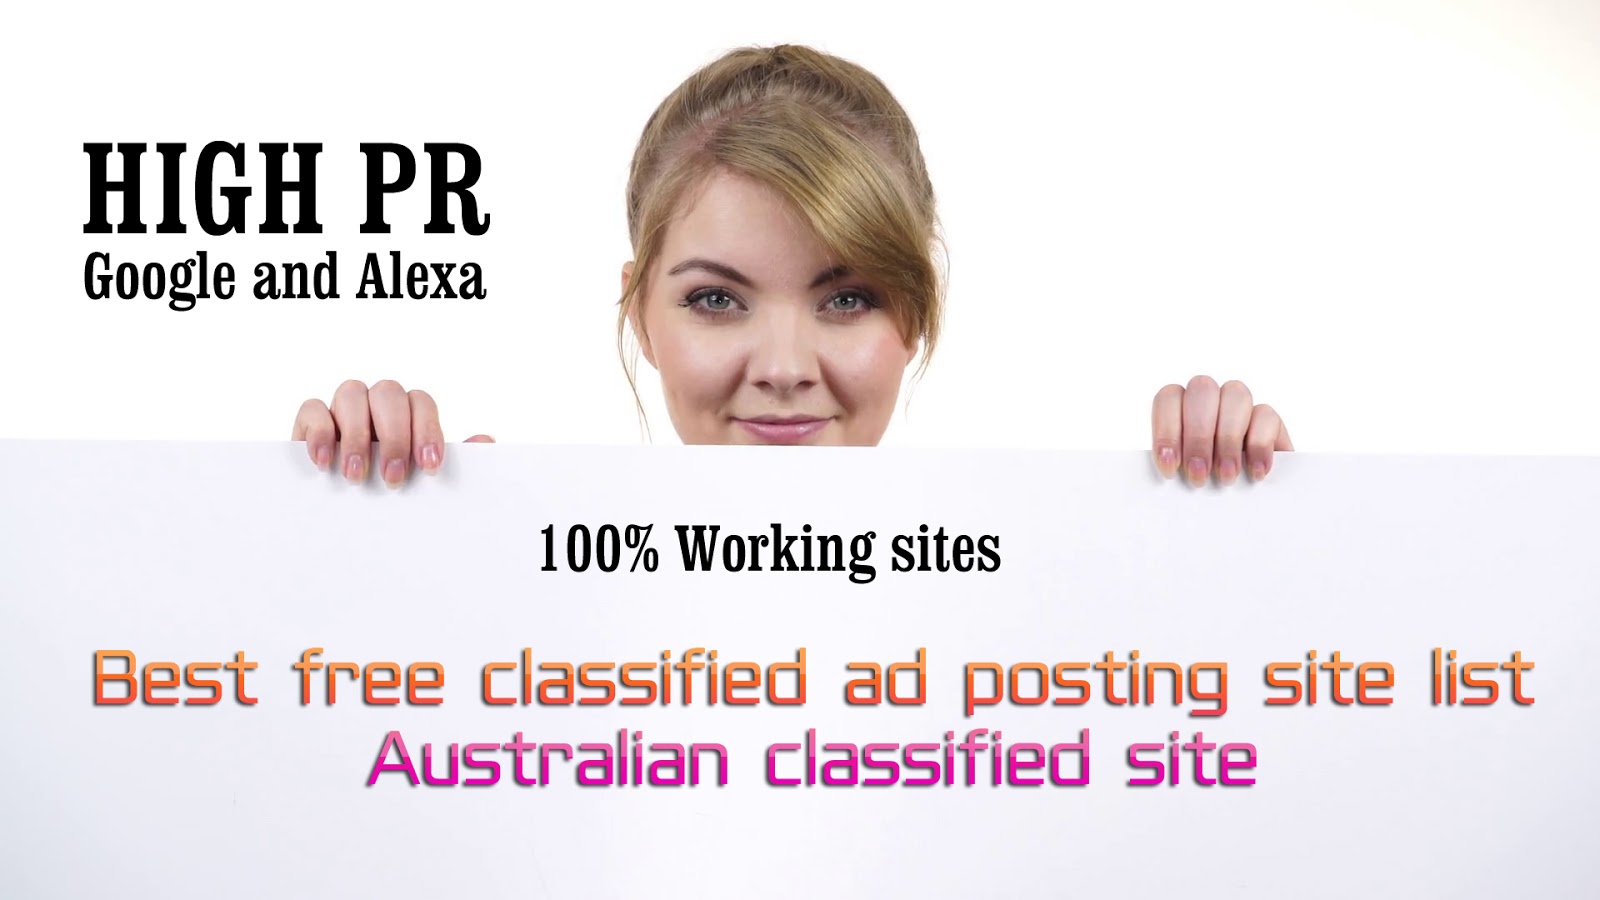 Classified. Classified ad pictures. Ad posting